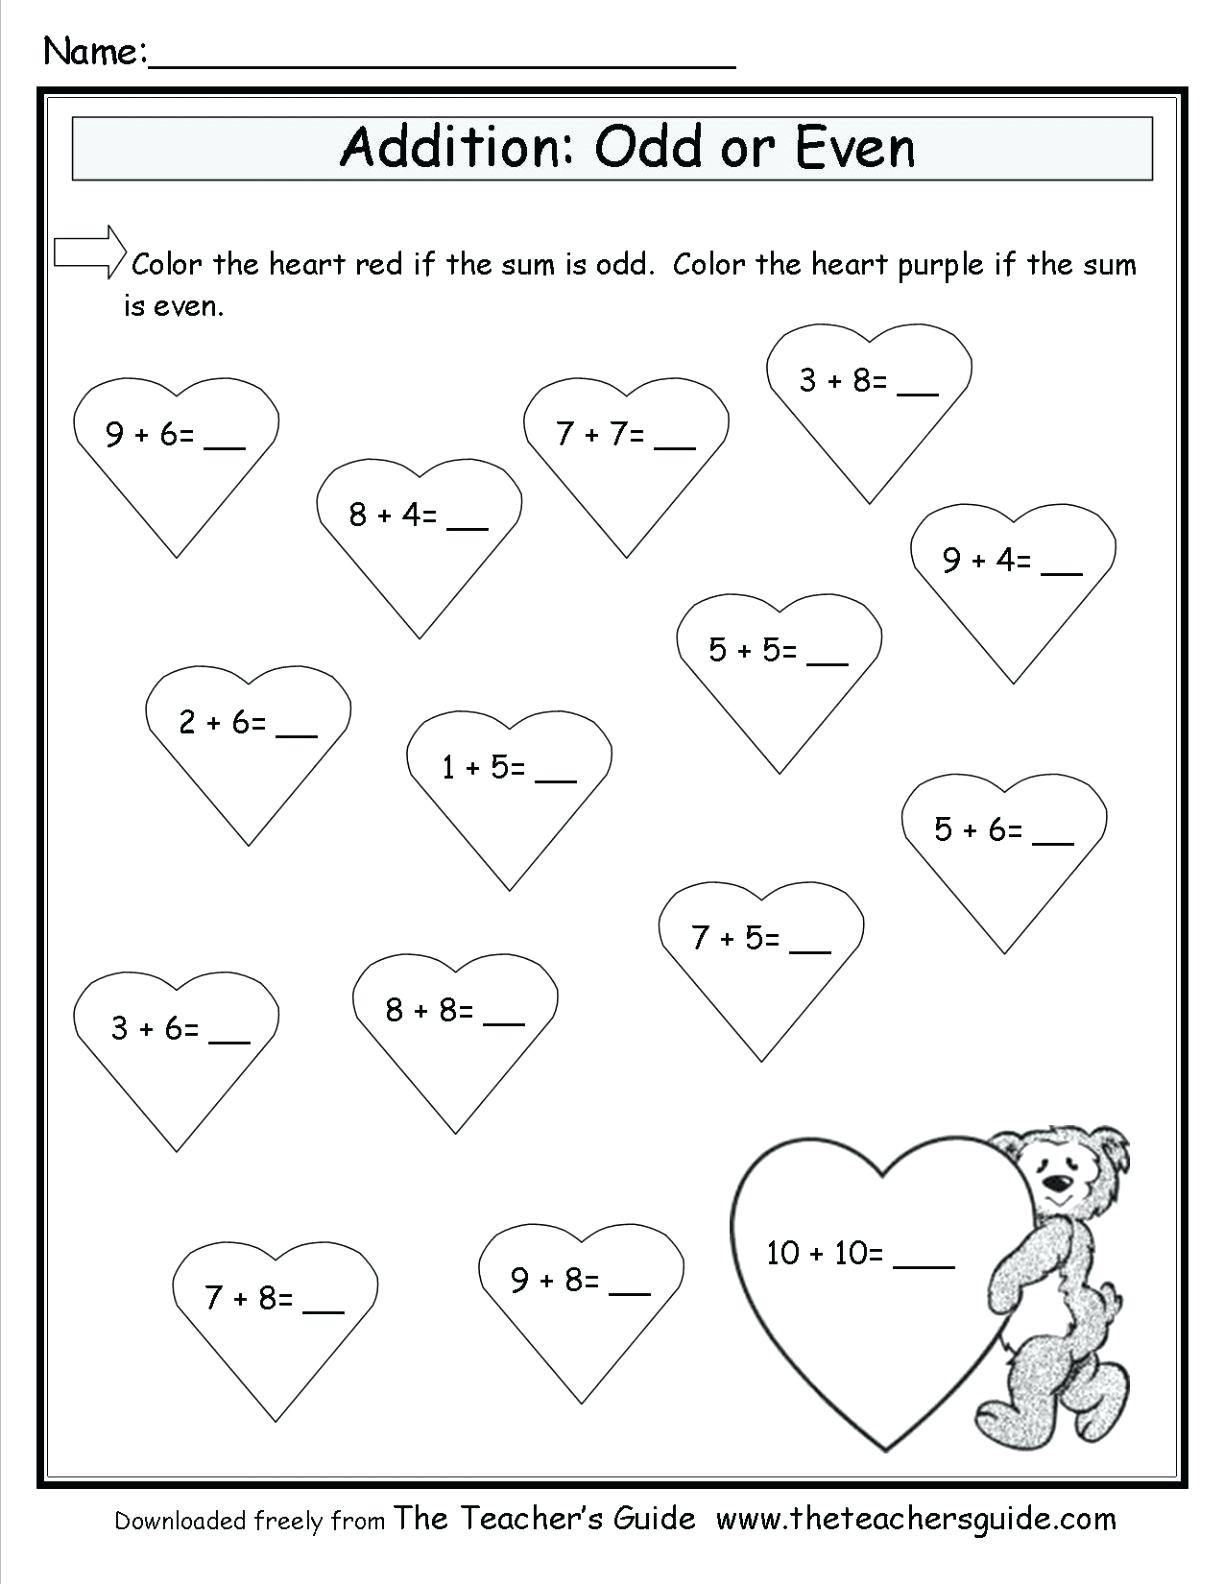 Free Math Worksheets Third Grade 3 Addition Add 4 Digit Numbers In Columns